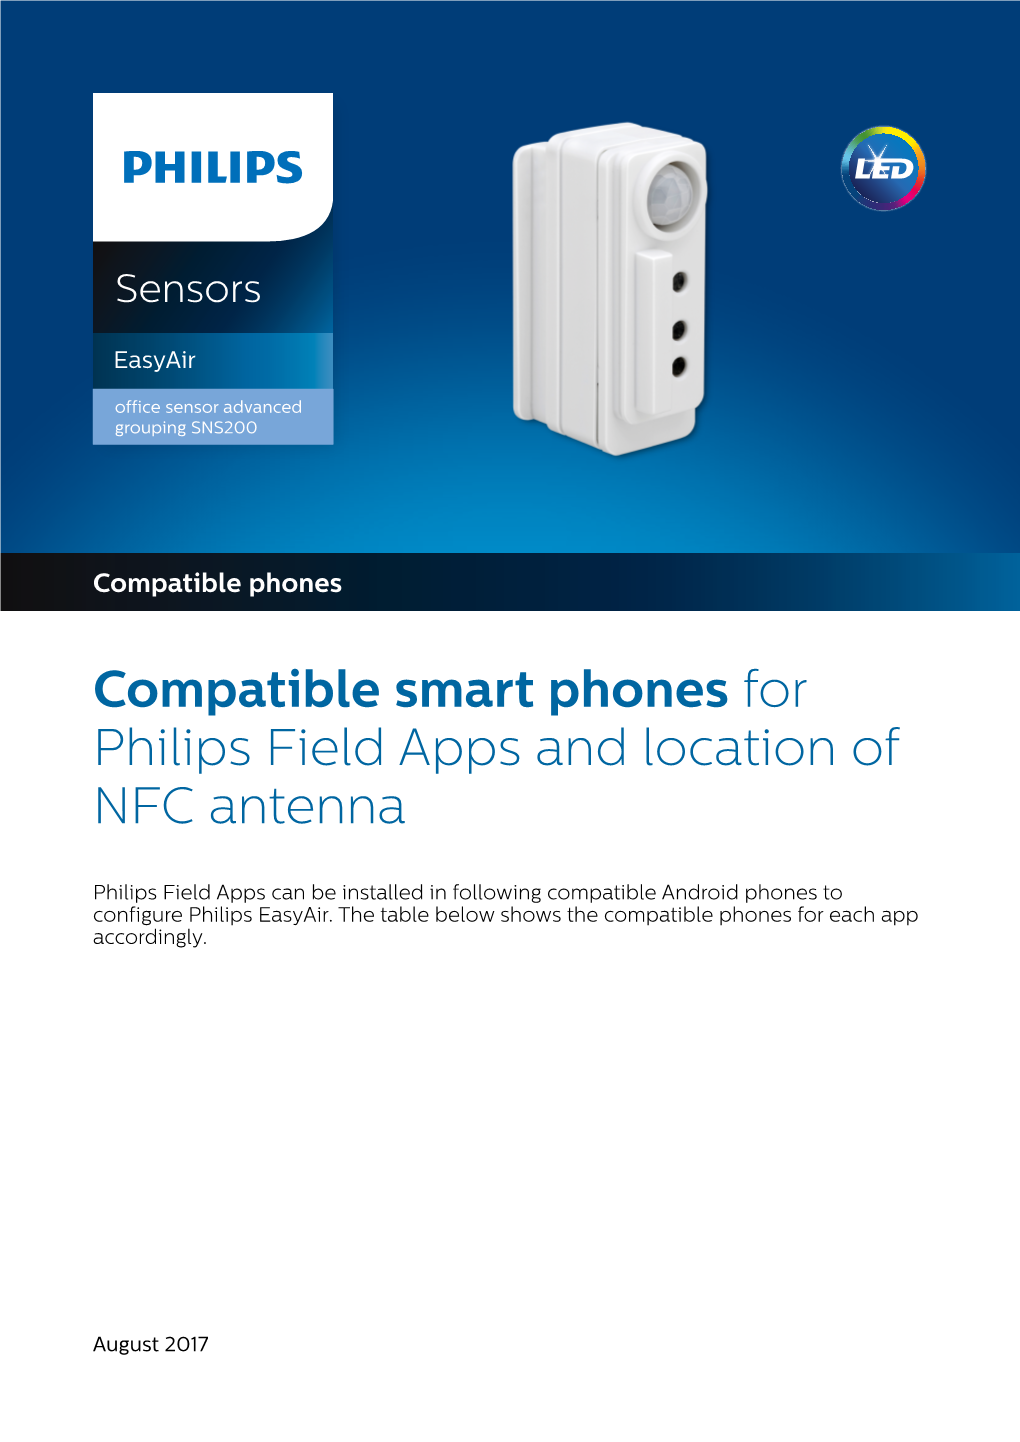 Compatible Smart Phones for Philips Field Apps and Location of NFC Antenna